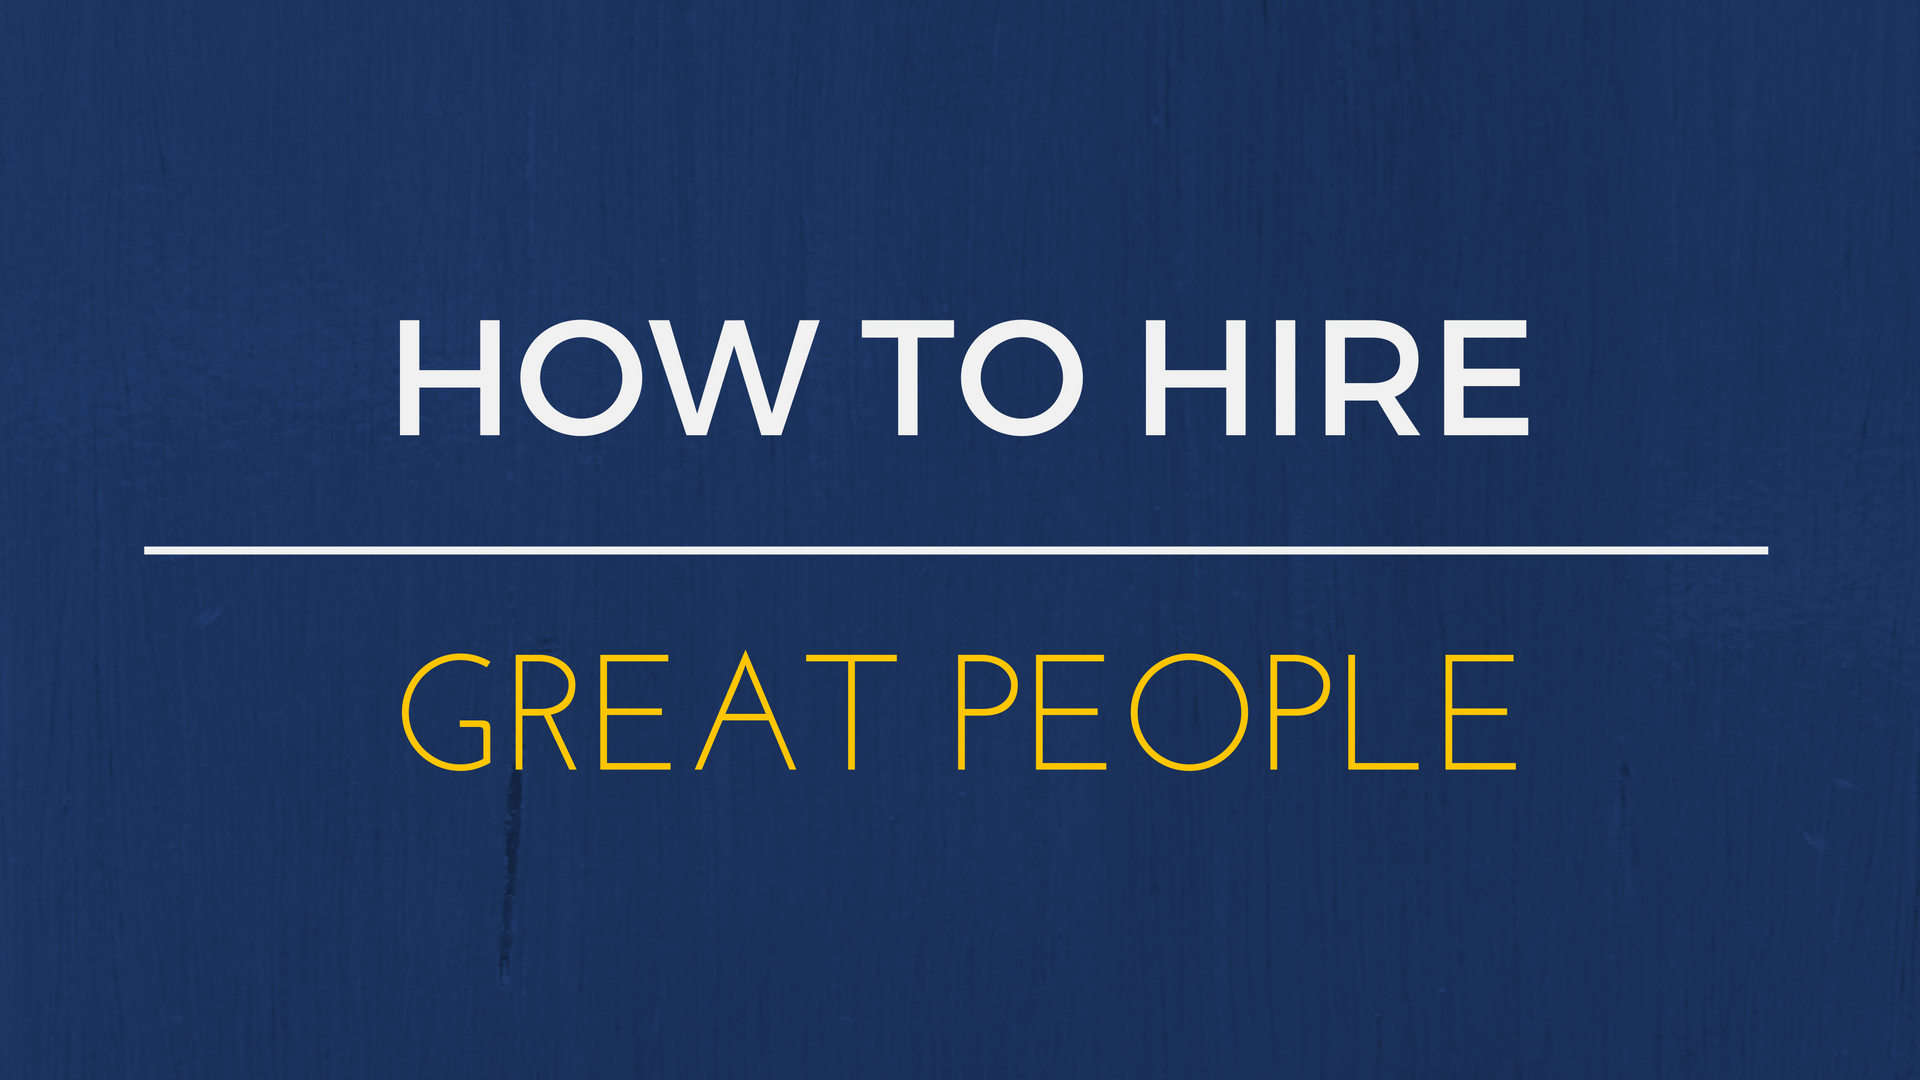 How To Hire Great People